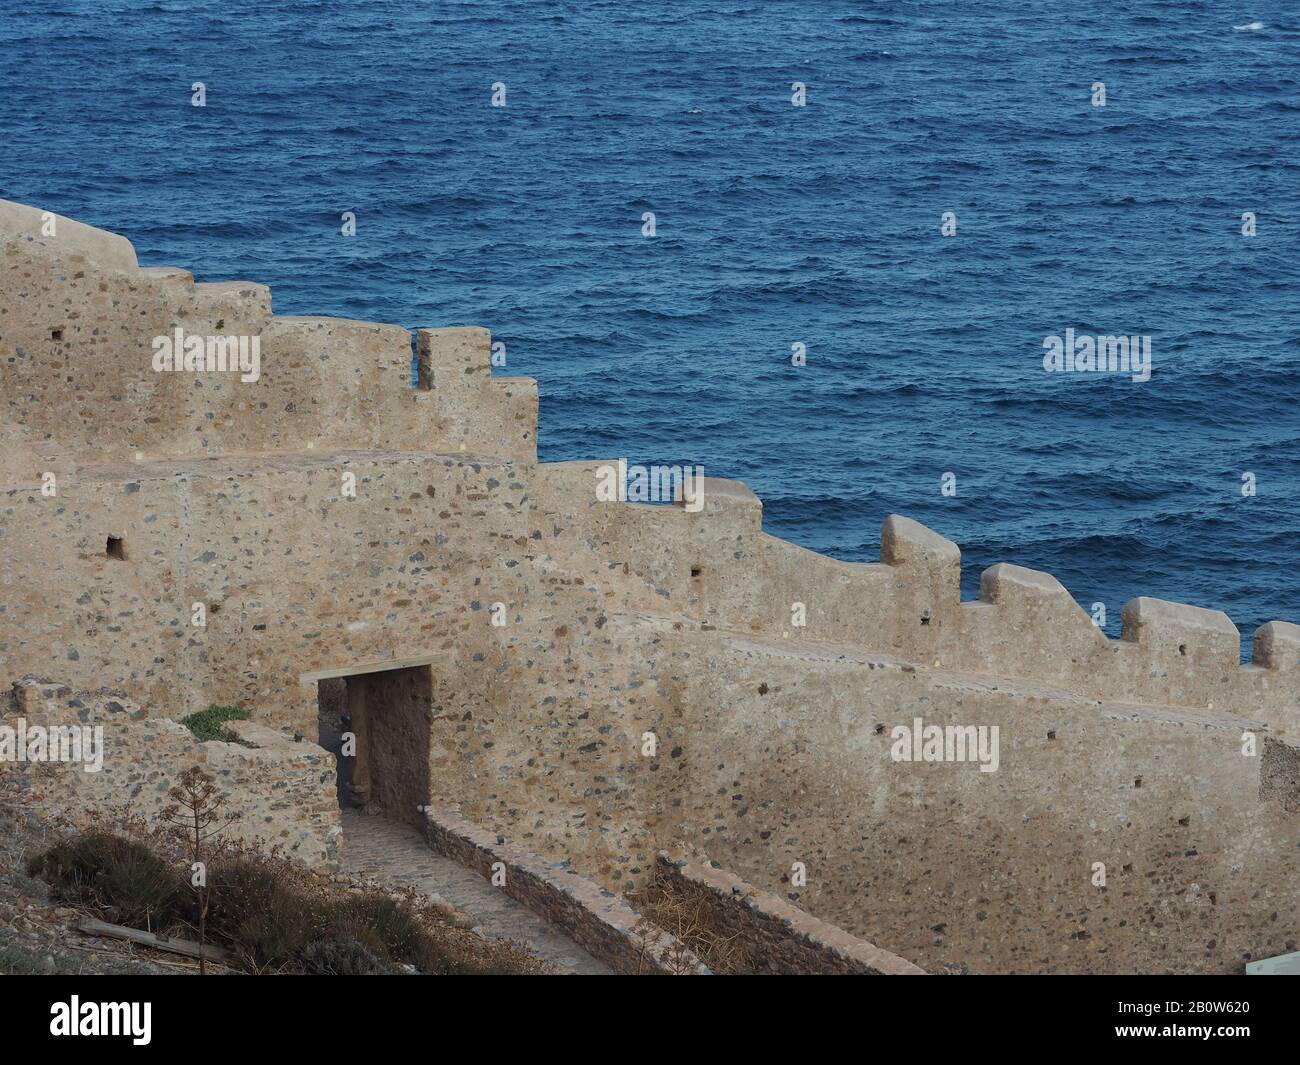 Stone wall of the walled town of Monemvasia, Laconia, Peloponnese, Greece, set against a blue sea. Stock Photo